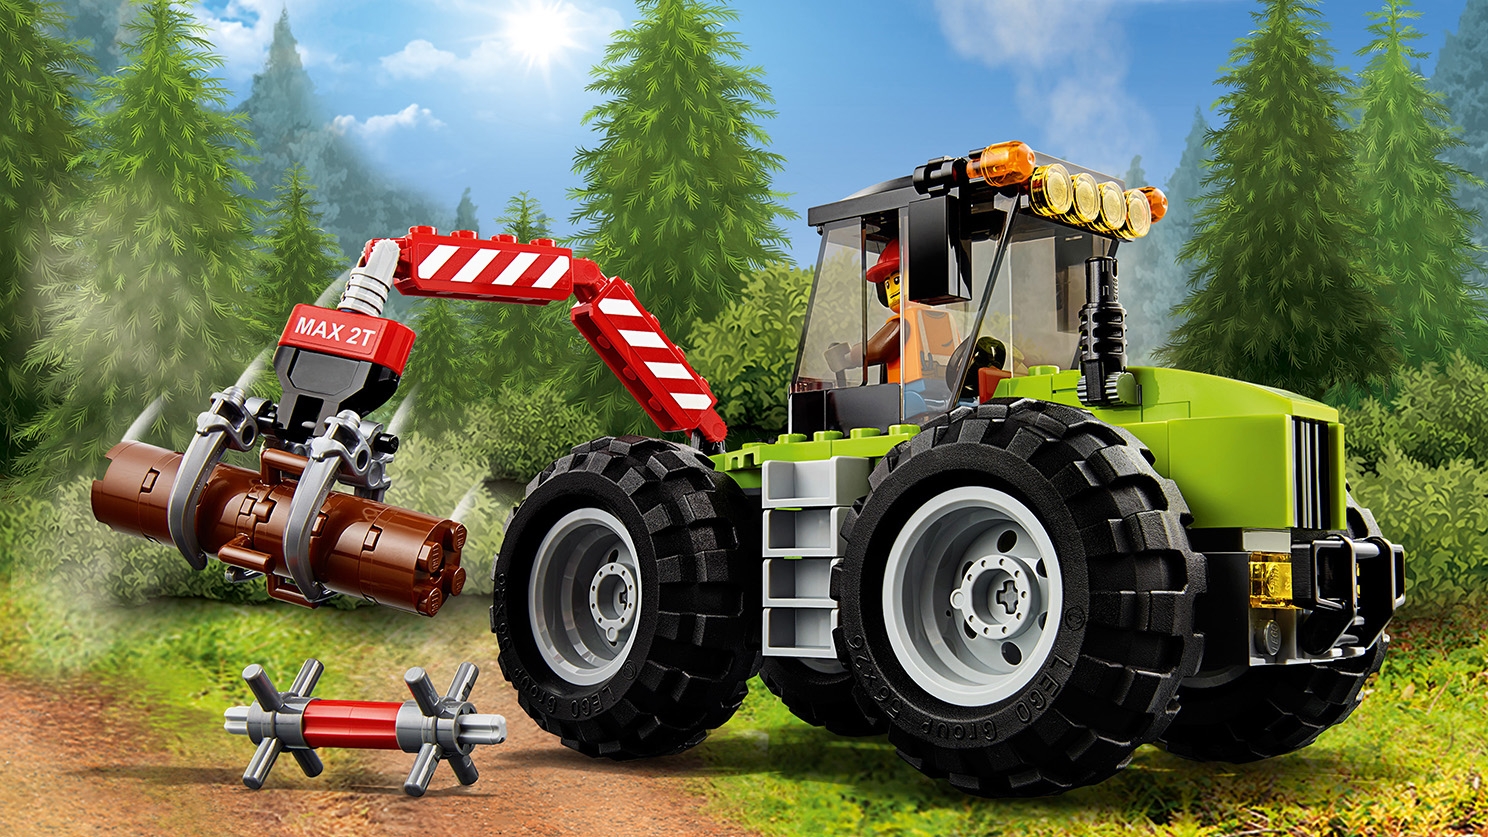 Forest Tractor 60181 LEGO® City Sets - LEGO.com for